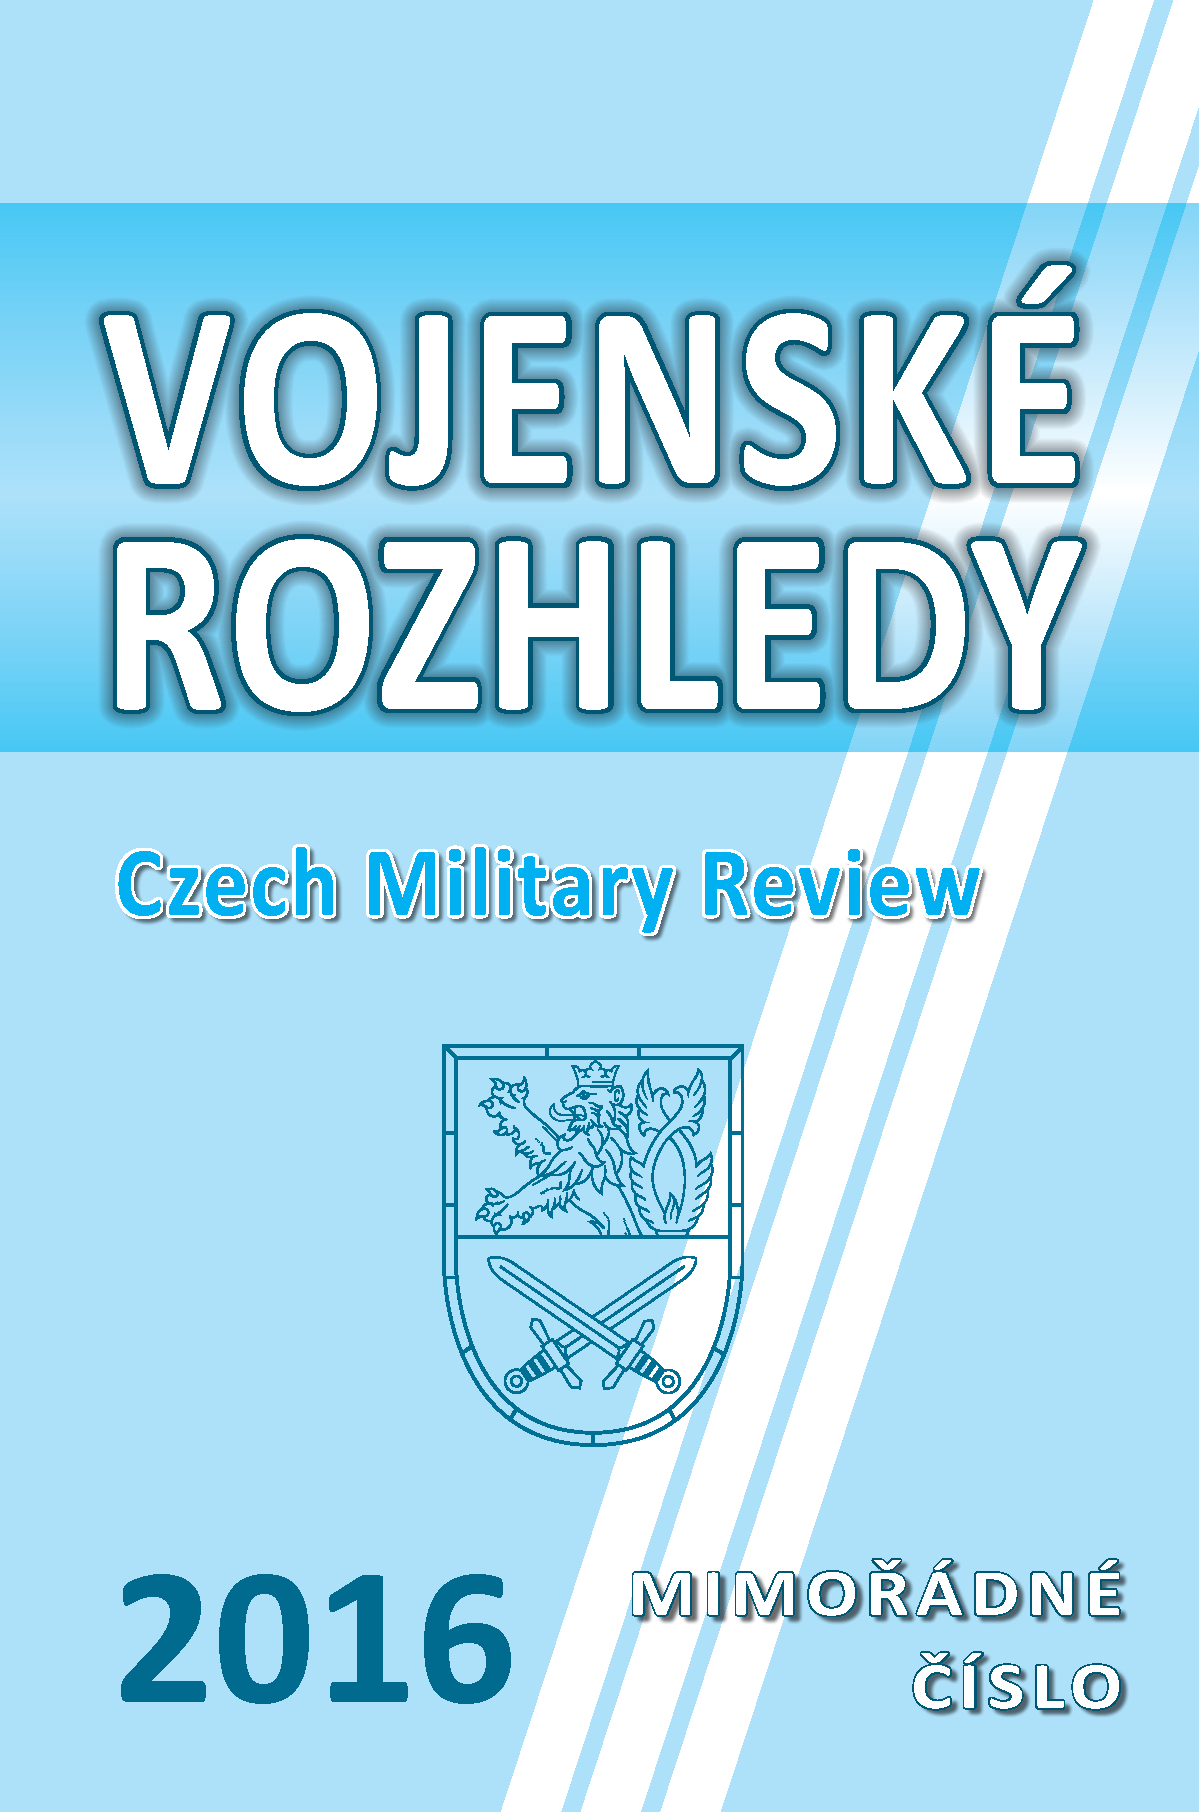 Czech Defence Policy Response to Dynamics in Security Environment Development Cover Image